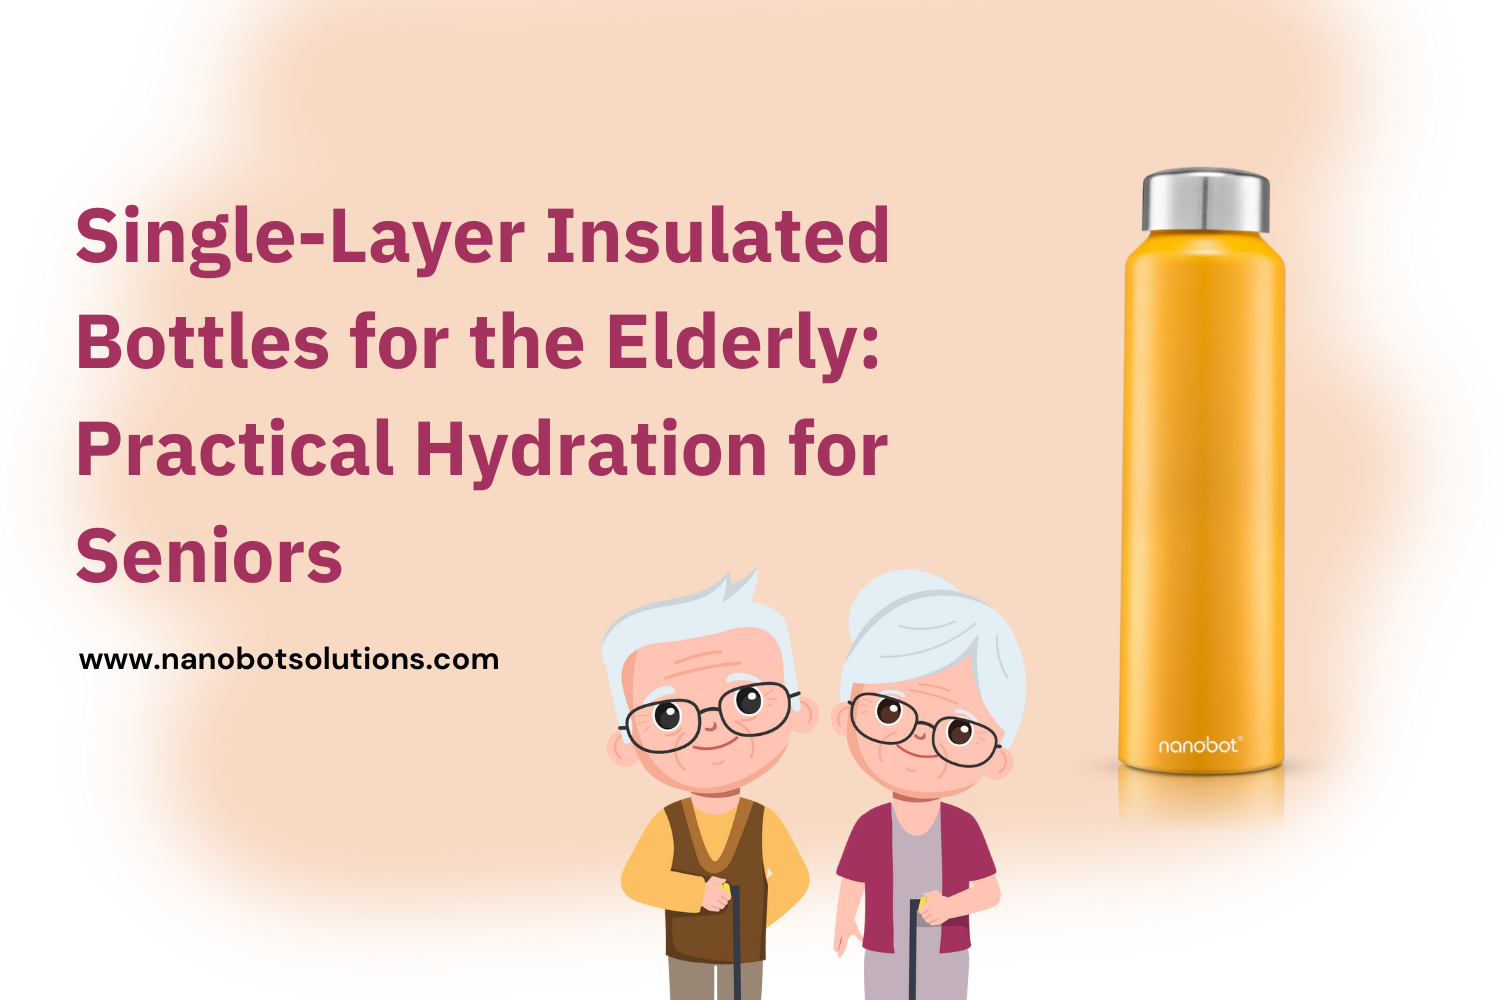 Single-Layer Insulated Bottles for the Elderly: Practical Hydration for Seniors